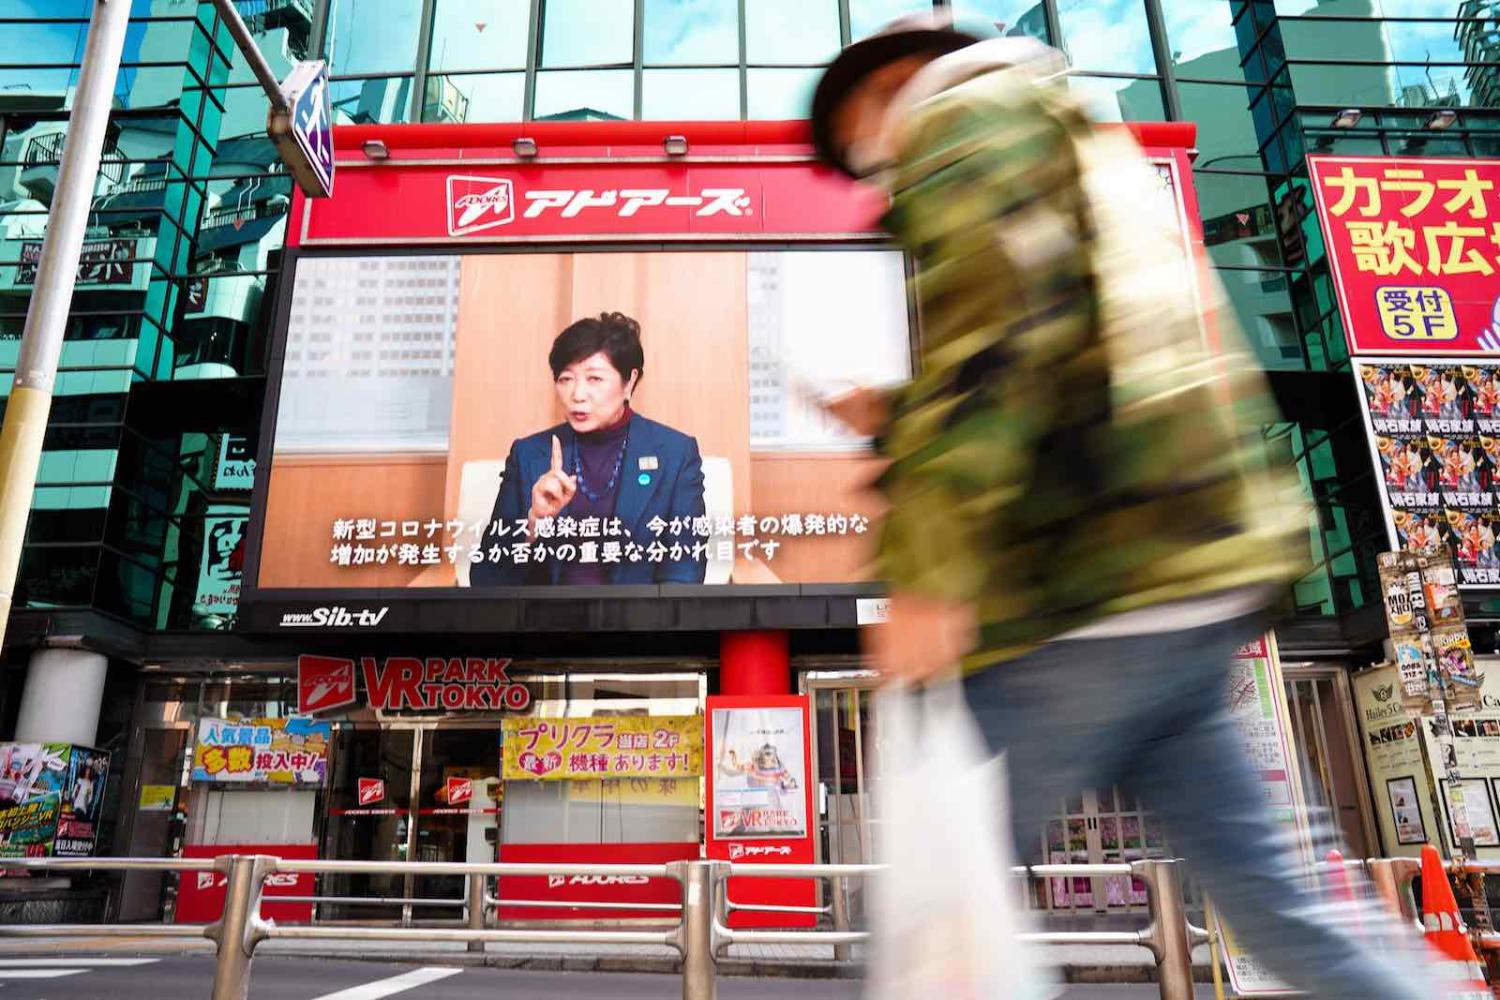 Governor Yuriko Koike on a video screen in Tokyo’s Shibuya district requesting residents to follow Covid-19 stay-at-home orders, 11 April 2020 (Asahi Shimbun via Getty Images)